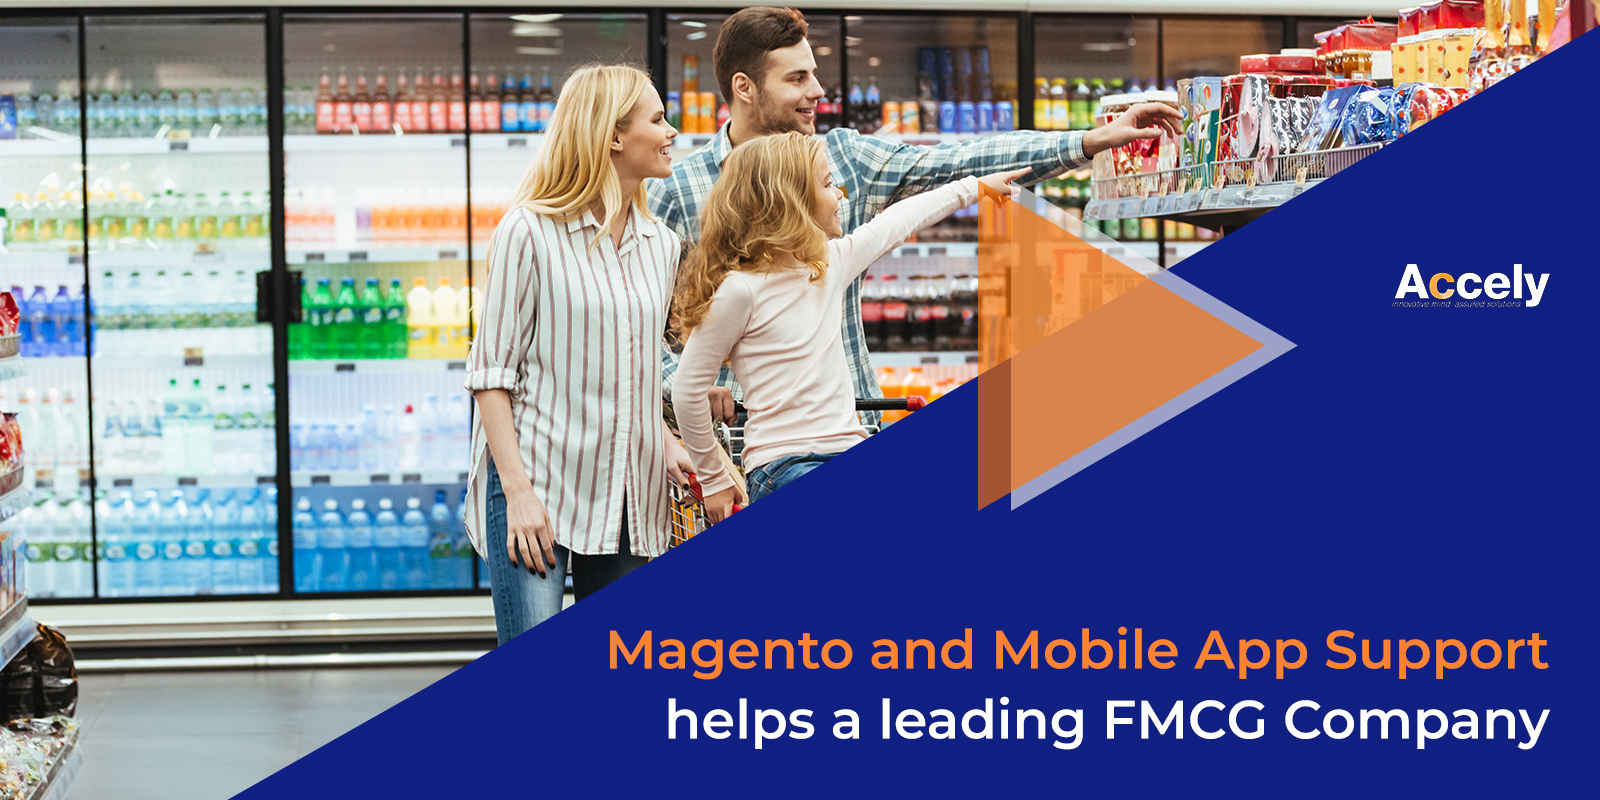 Dubai-Based FMCG Multinational Giant Benefits from Magento and Mobile App Support